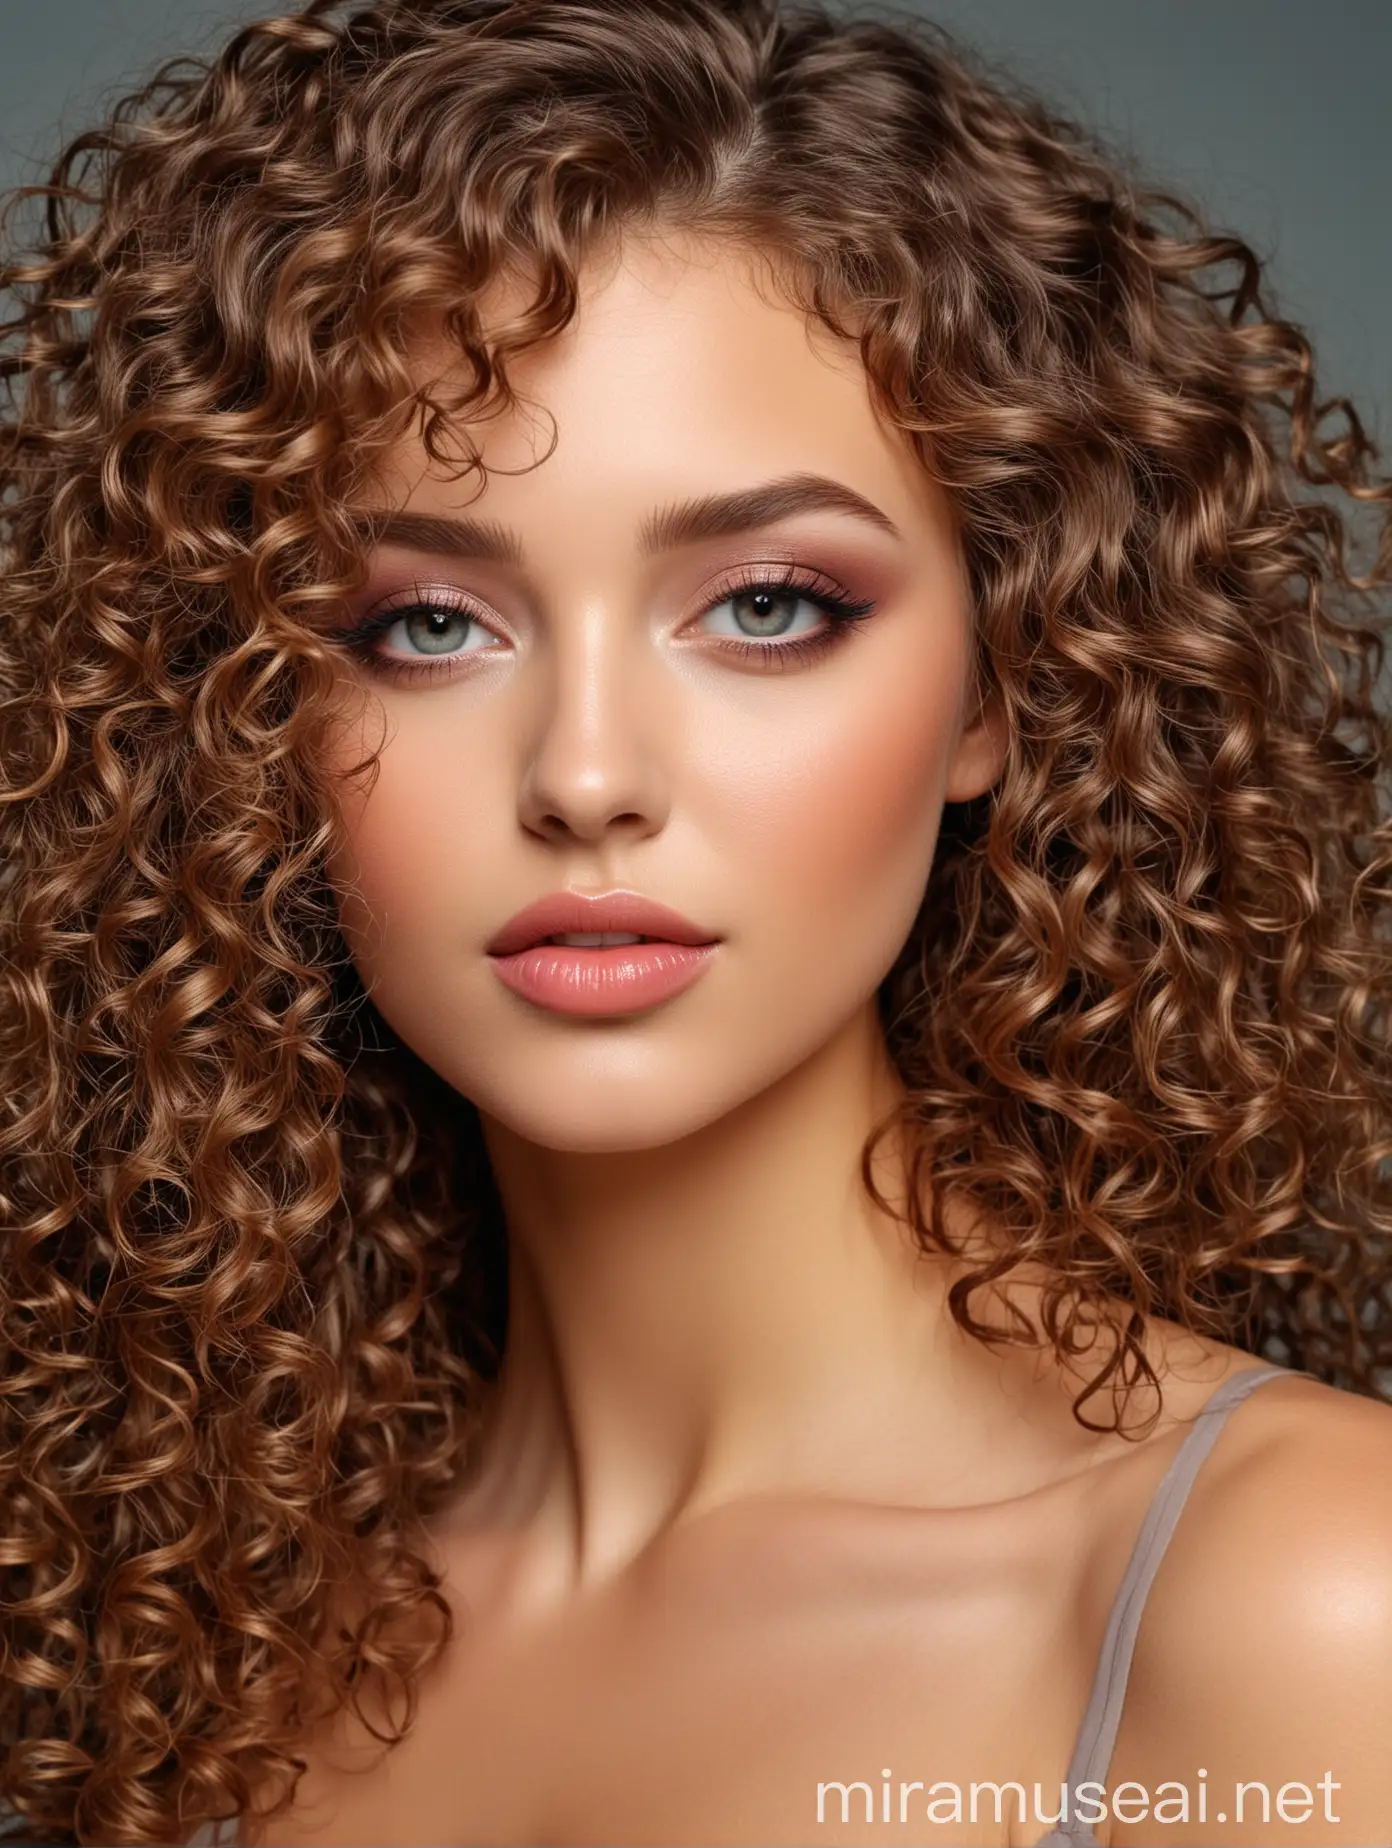 Elegant Woman with Curly Hair and Stunning Makeup